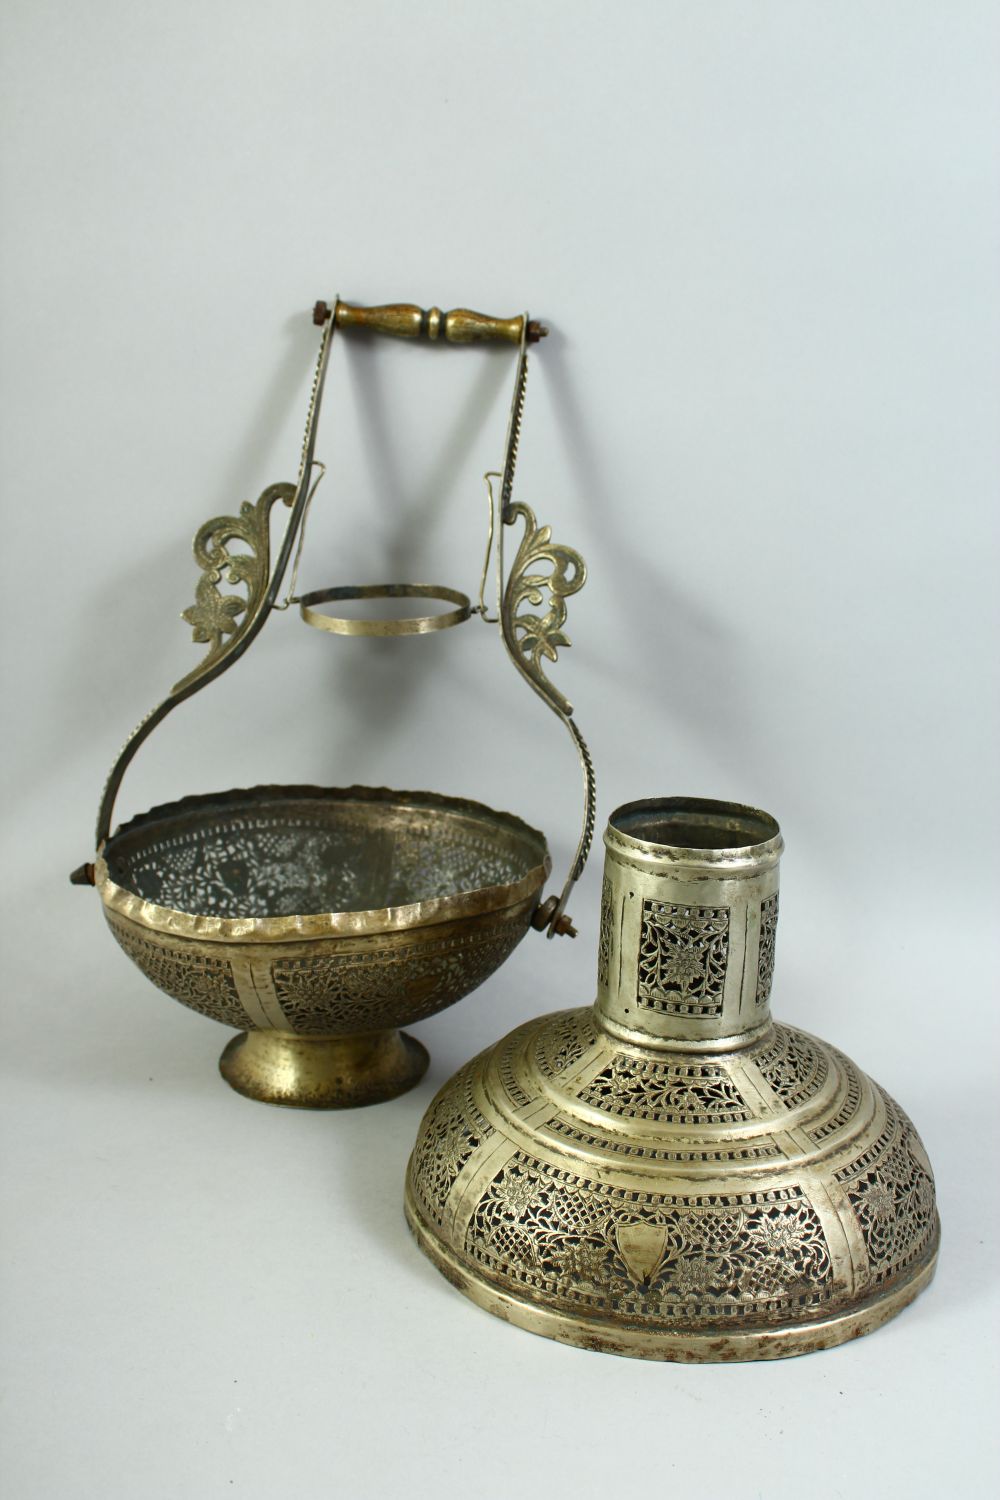 AN ISLAMIC OPENWORK METAL LANTERN / LAMP, with pierced floral decoration and handle, 38cm high - Image 5 of 5